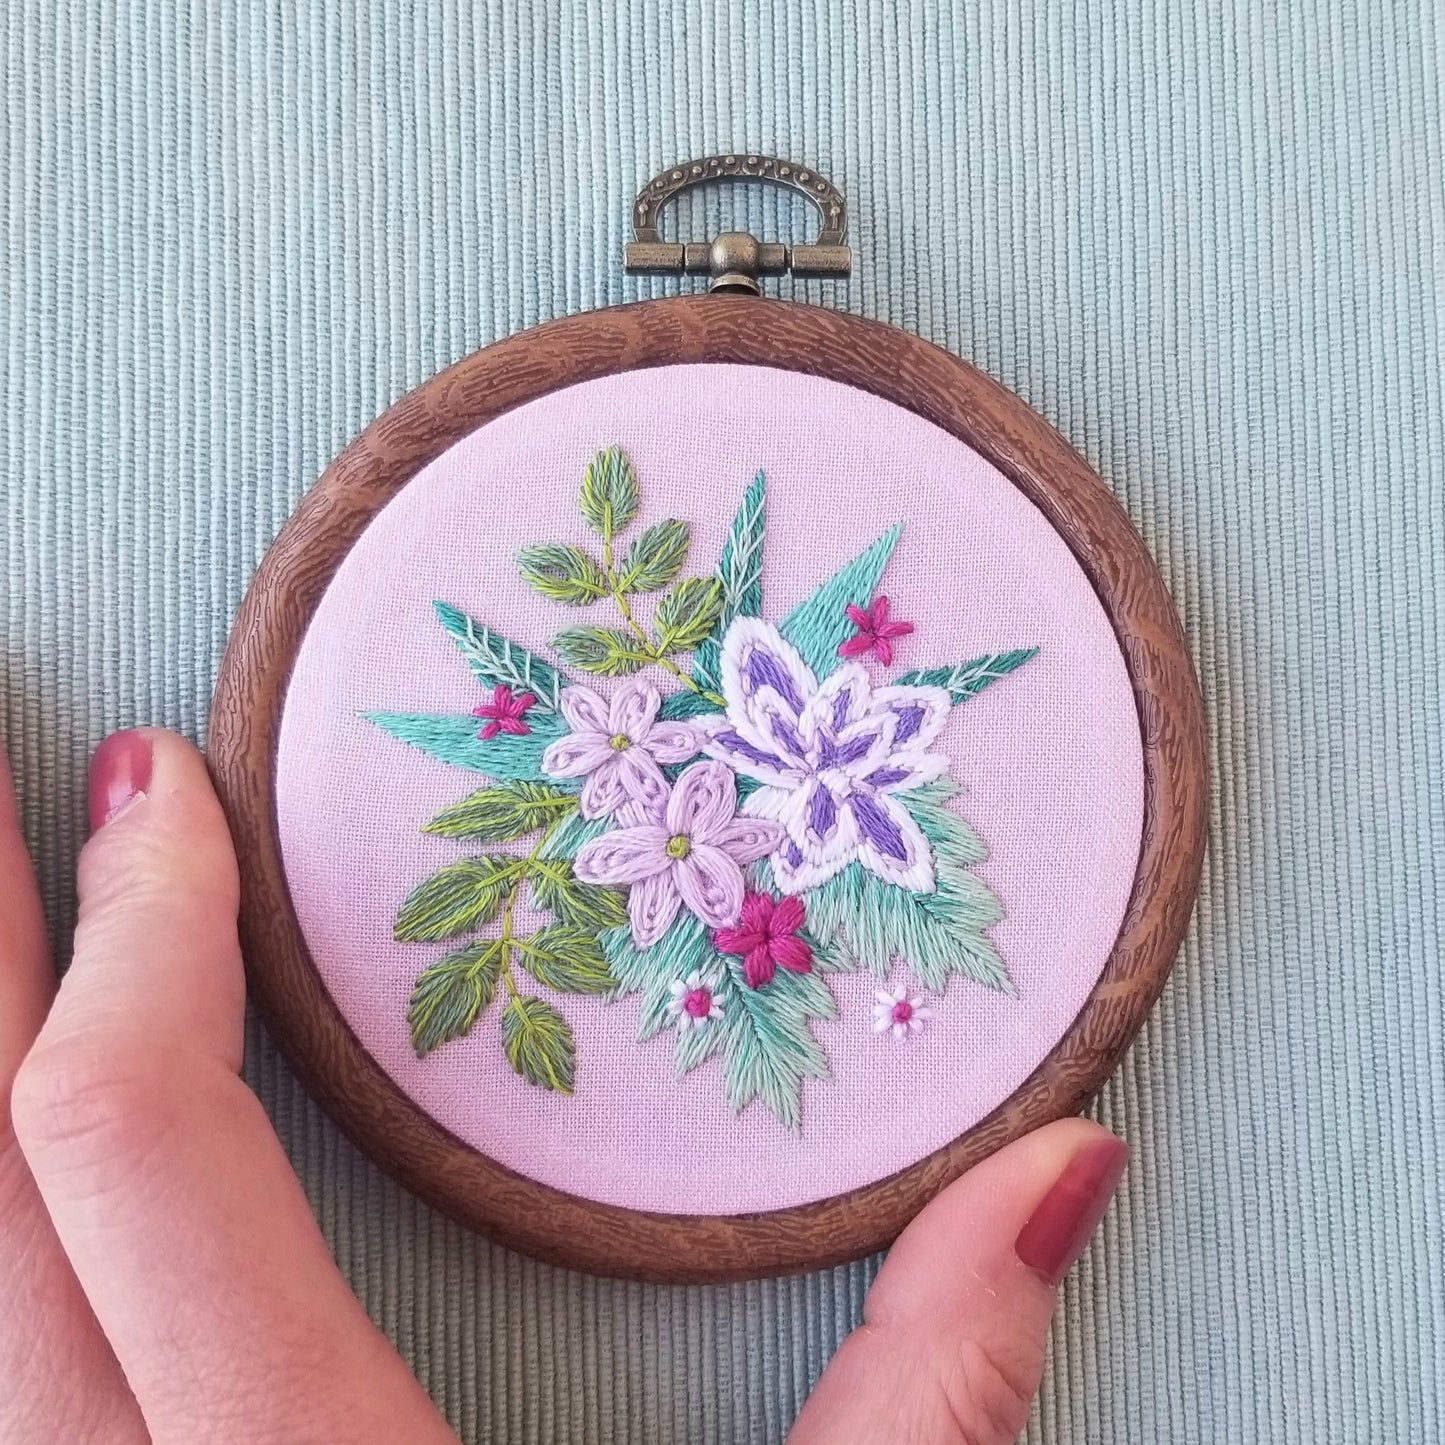 Tender Petals Embroidery Pattern (PDF)